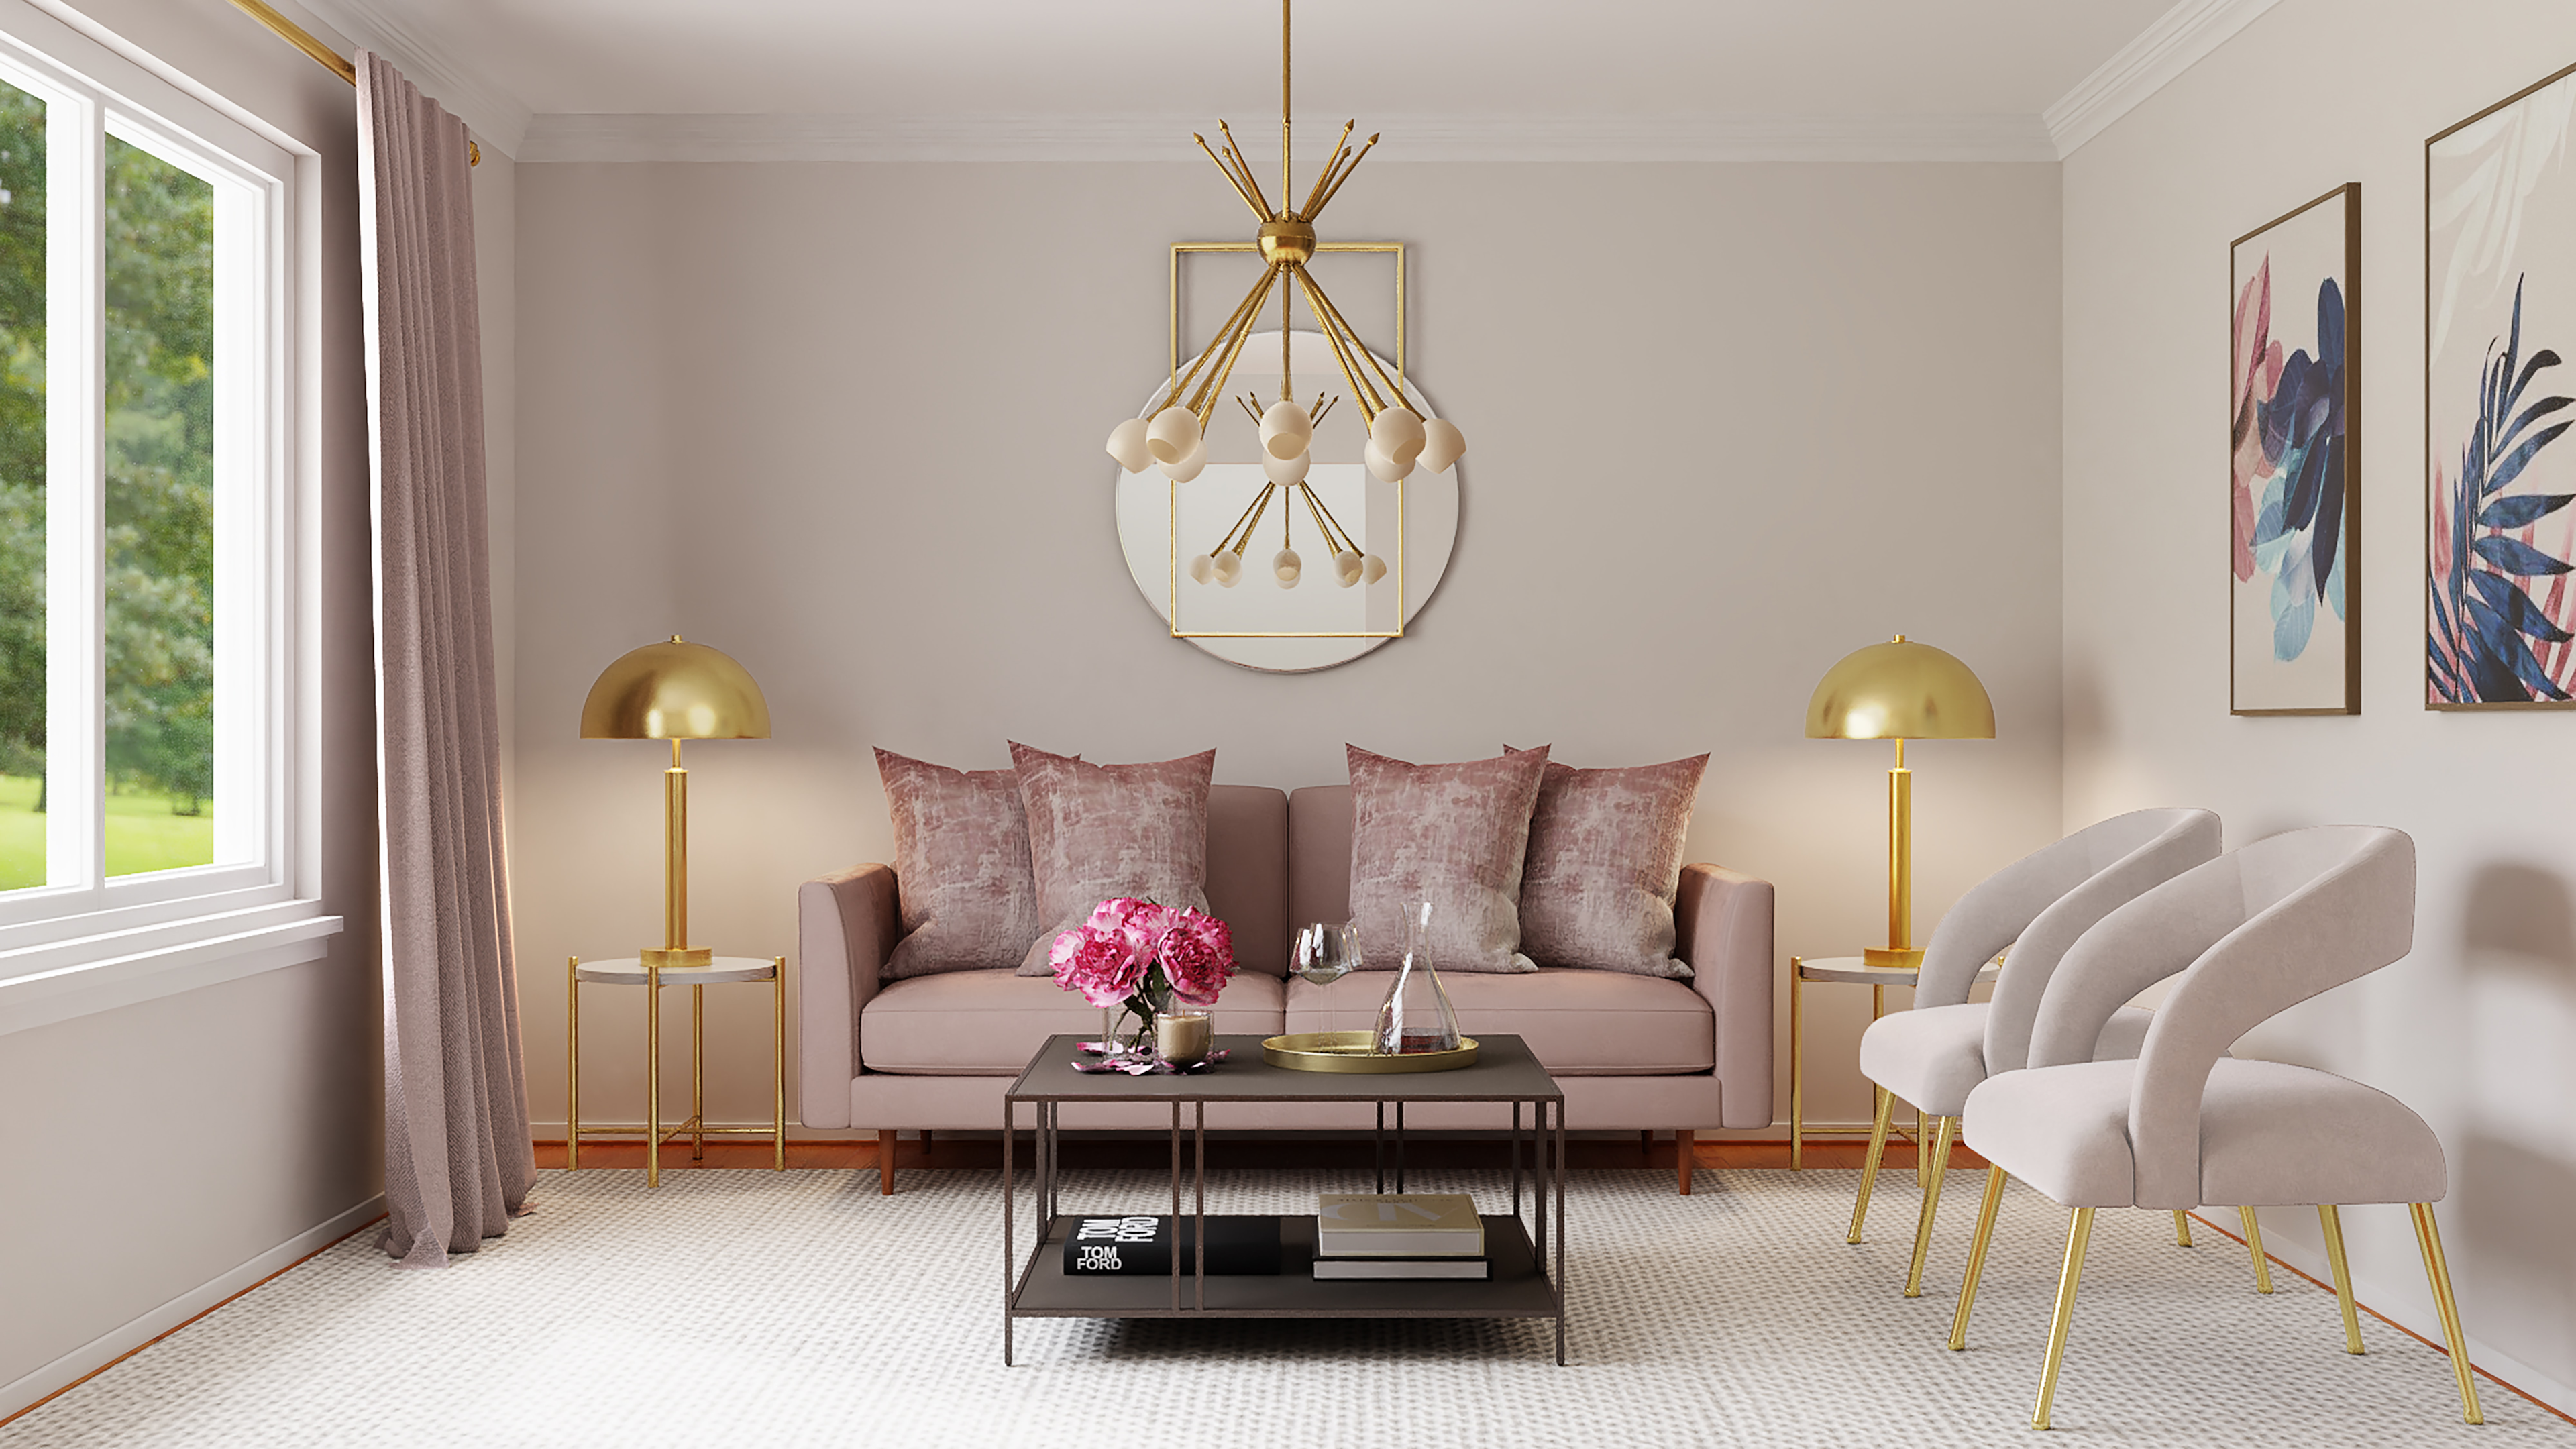 neutral mauve modern living room with gold accent lamps and lighting - image credit: https://unsplash.com/photos/2d1k_A-nrY8